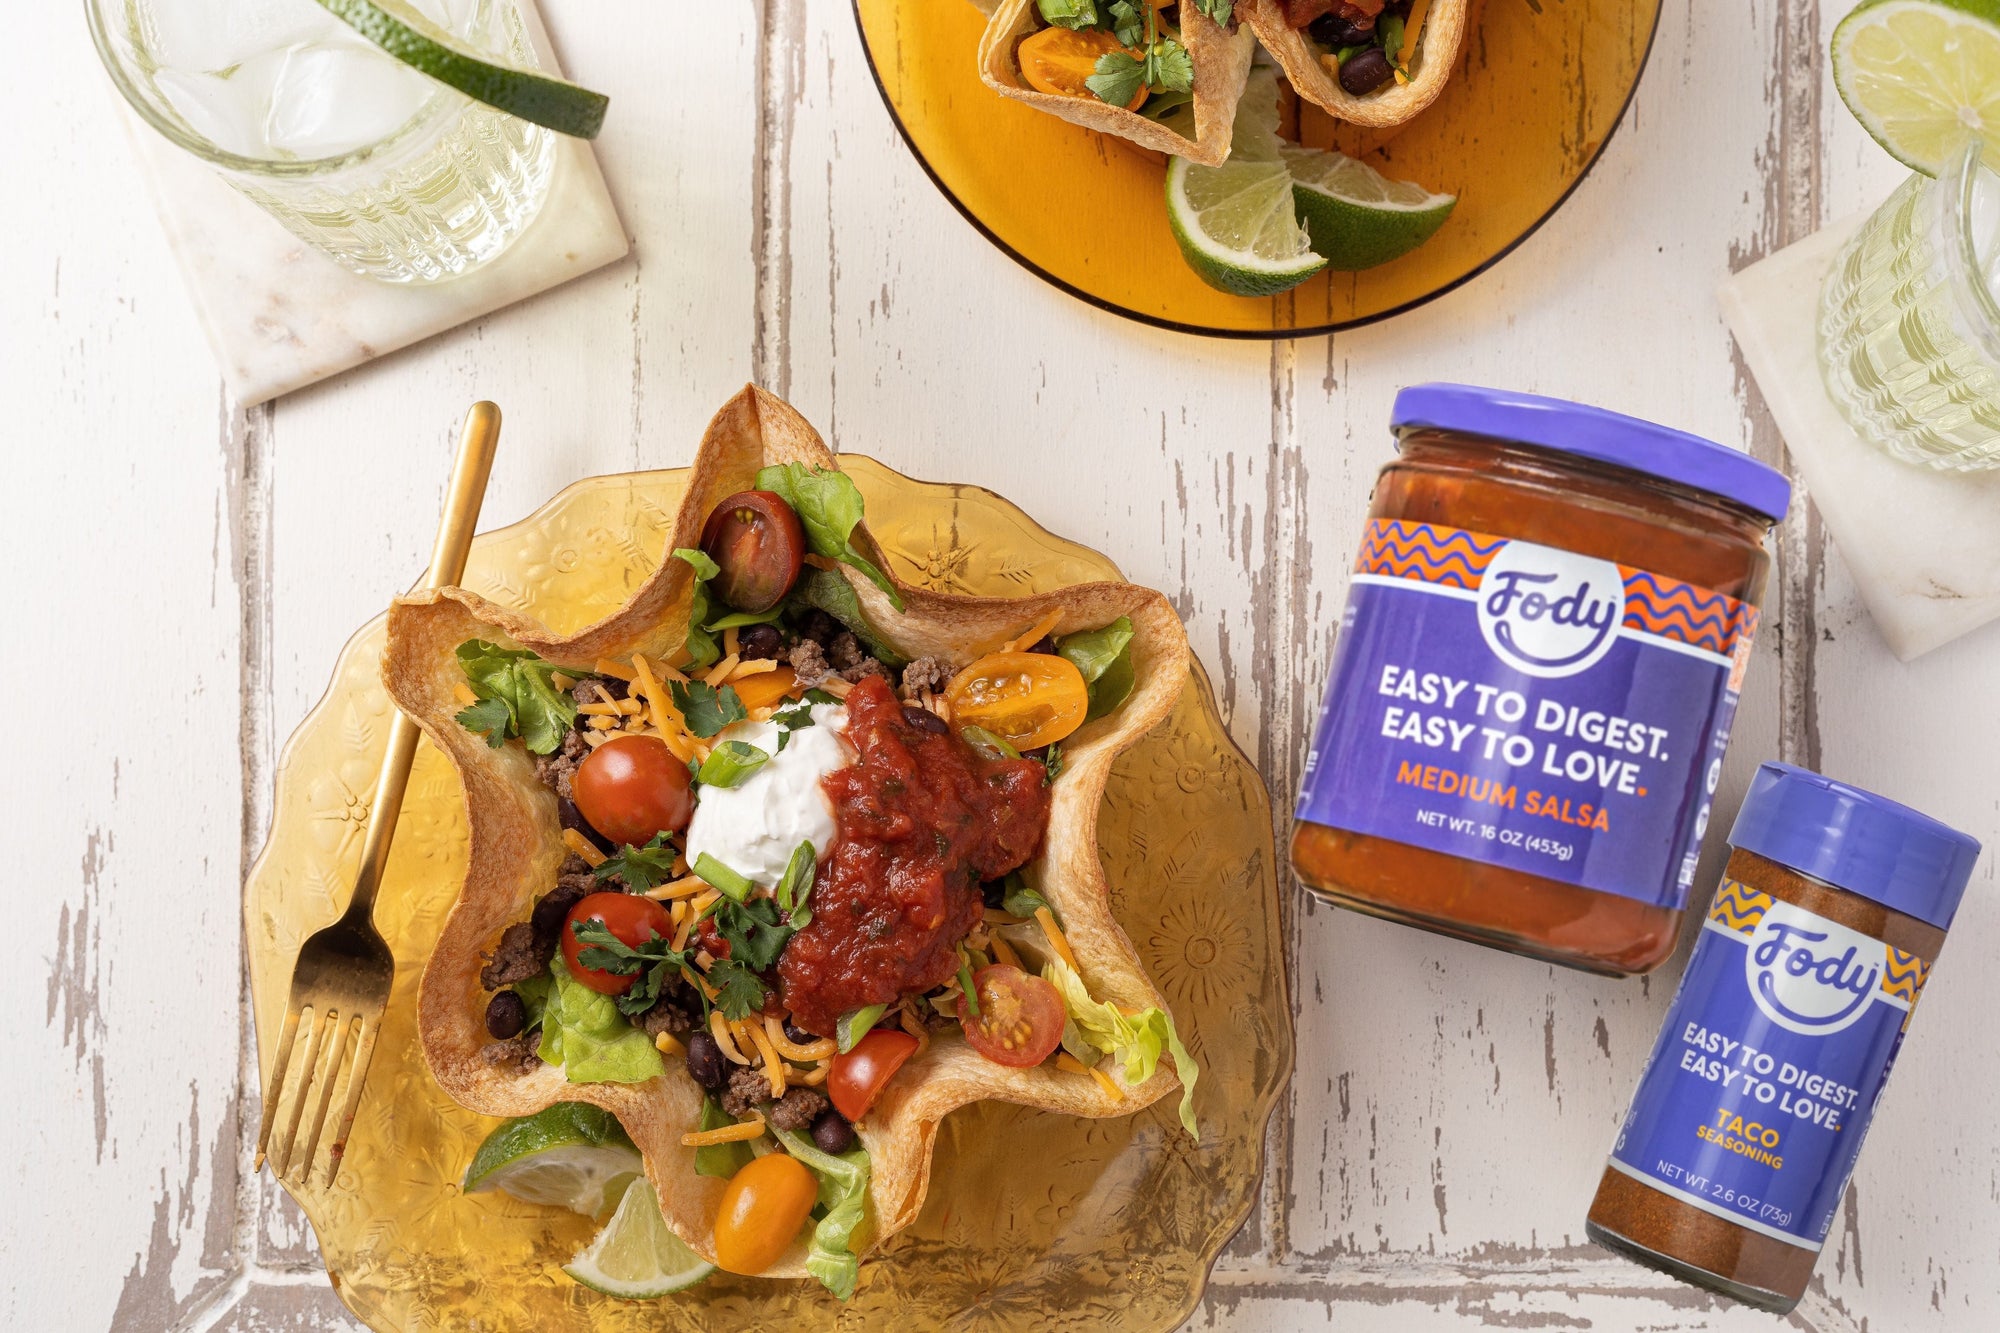 An image of Fody's Tortilla Bowl Taco Salad. A scalloped tortilla bowl filled with taco fillings sits on a rustic white wooden table, beside a mojito, a gold-coloured fork and two jars of Fody sauce and seasonings. 